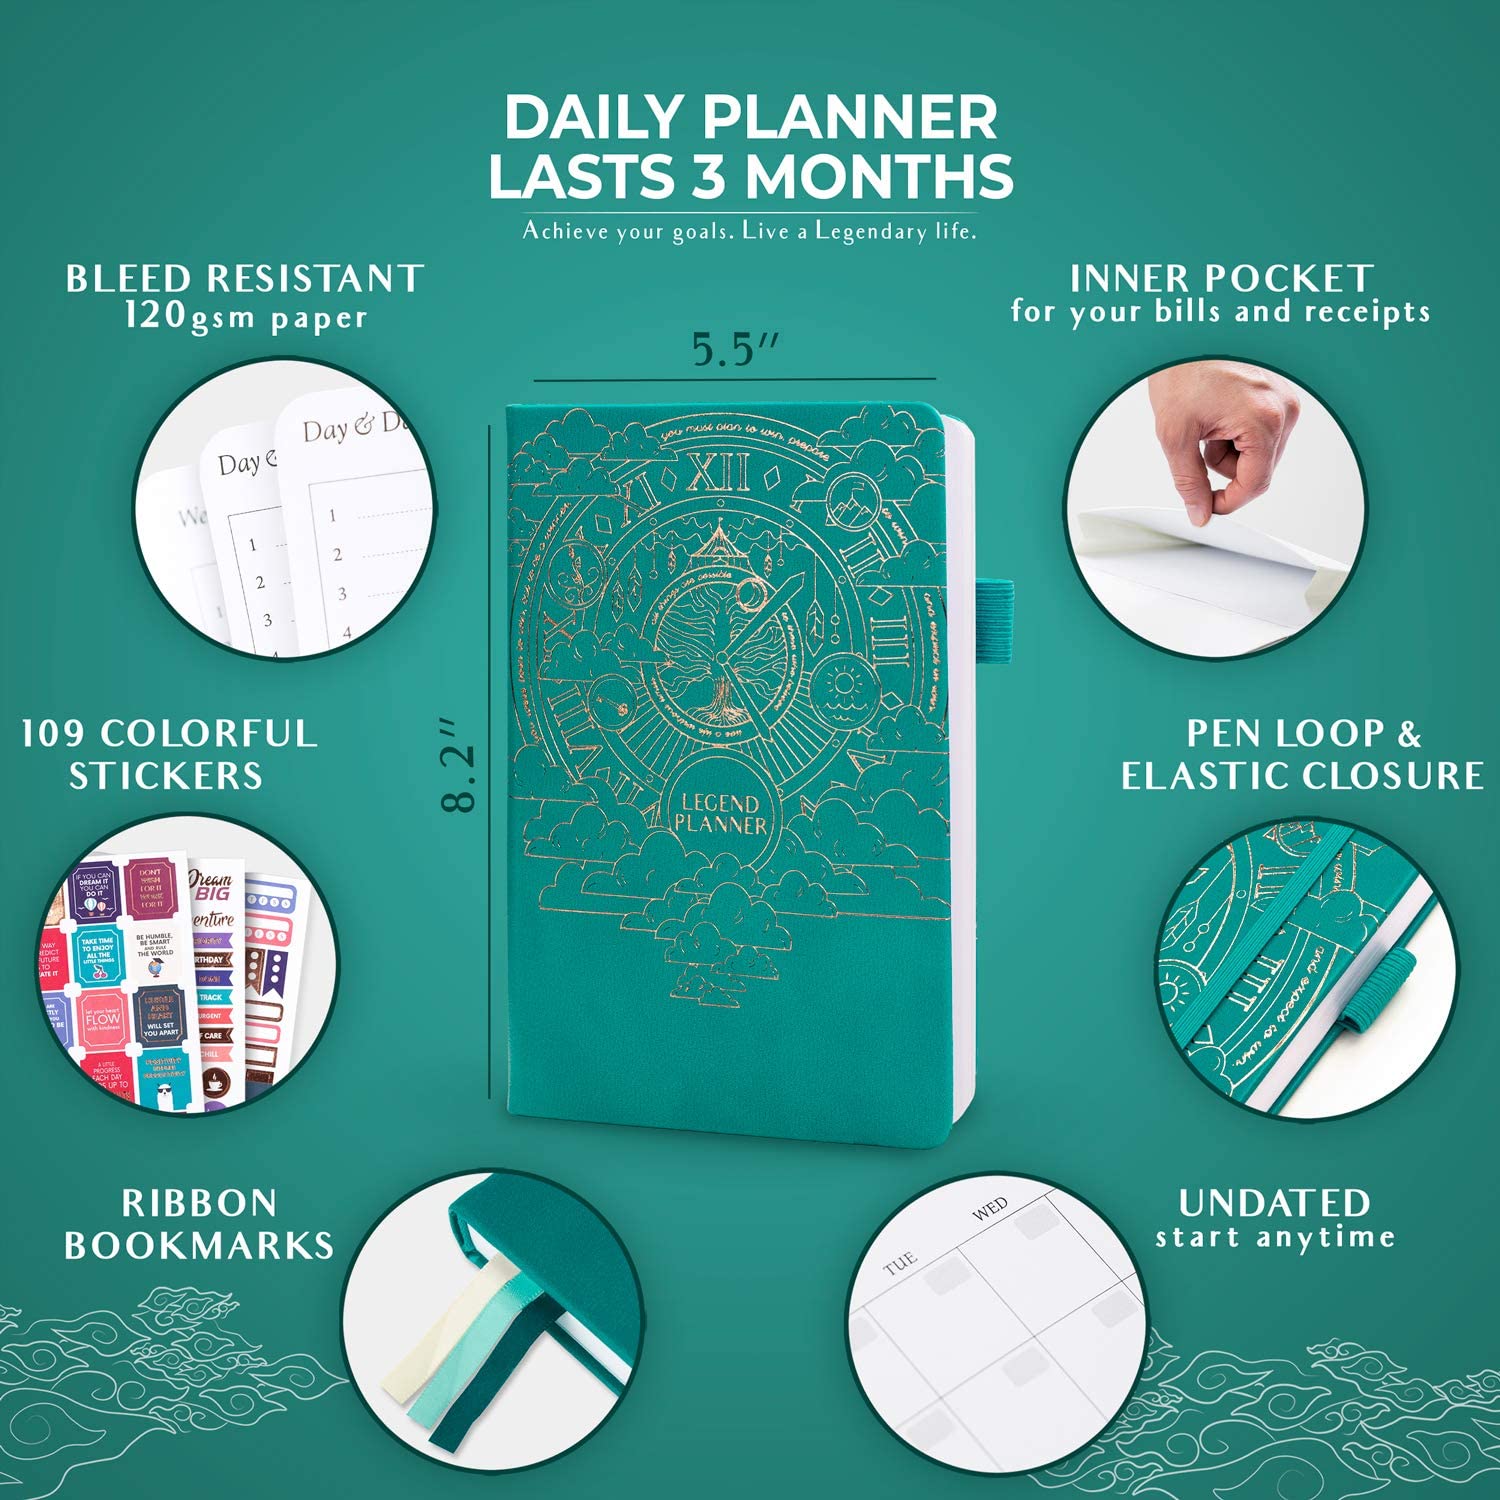 Legend Planner Daily for 3 Months - Undated Deluxe Monthly Weekly & Daily Planner to Hit Your Goals & Live Happier. - e4cents